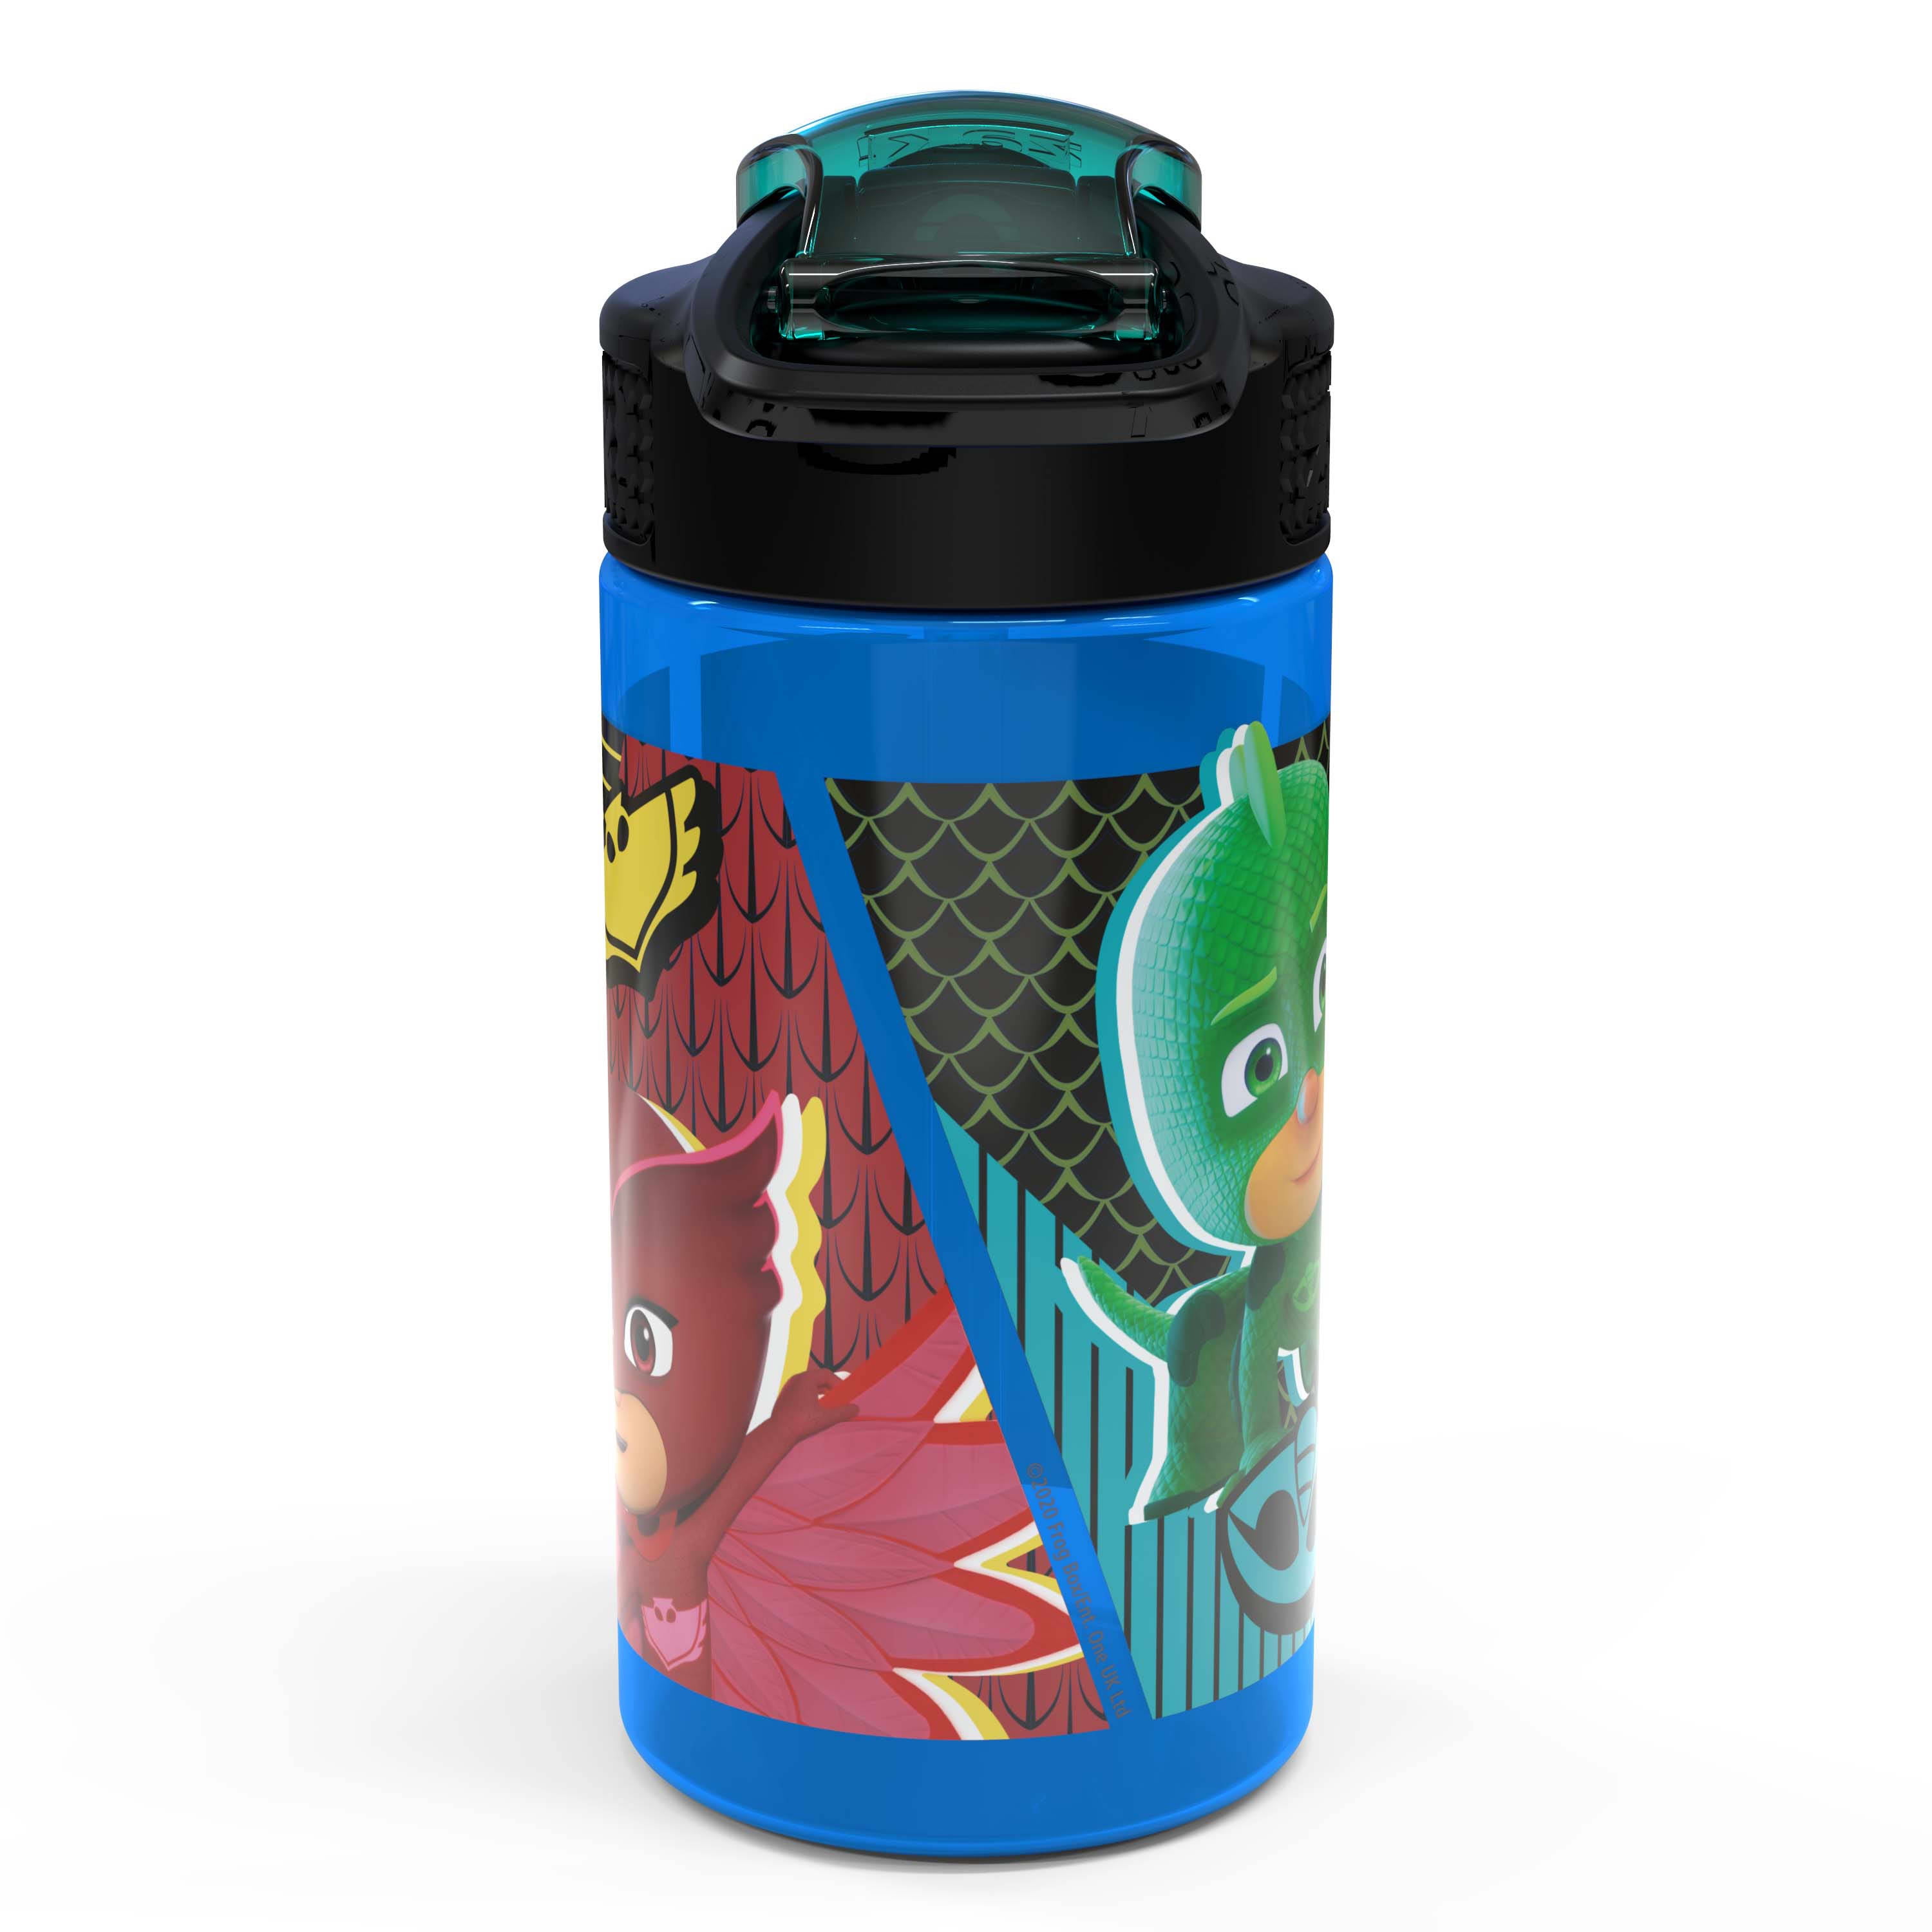 Zak! Designs Other | Bluey Water Bottle by Zak! Designs Nwt | Color: Blue/Green | Size: Osbb | Anhenric's Closet